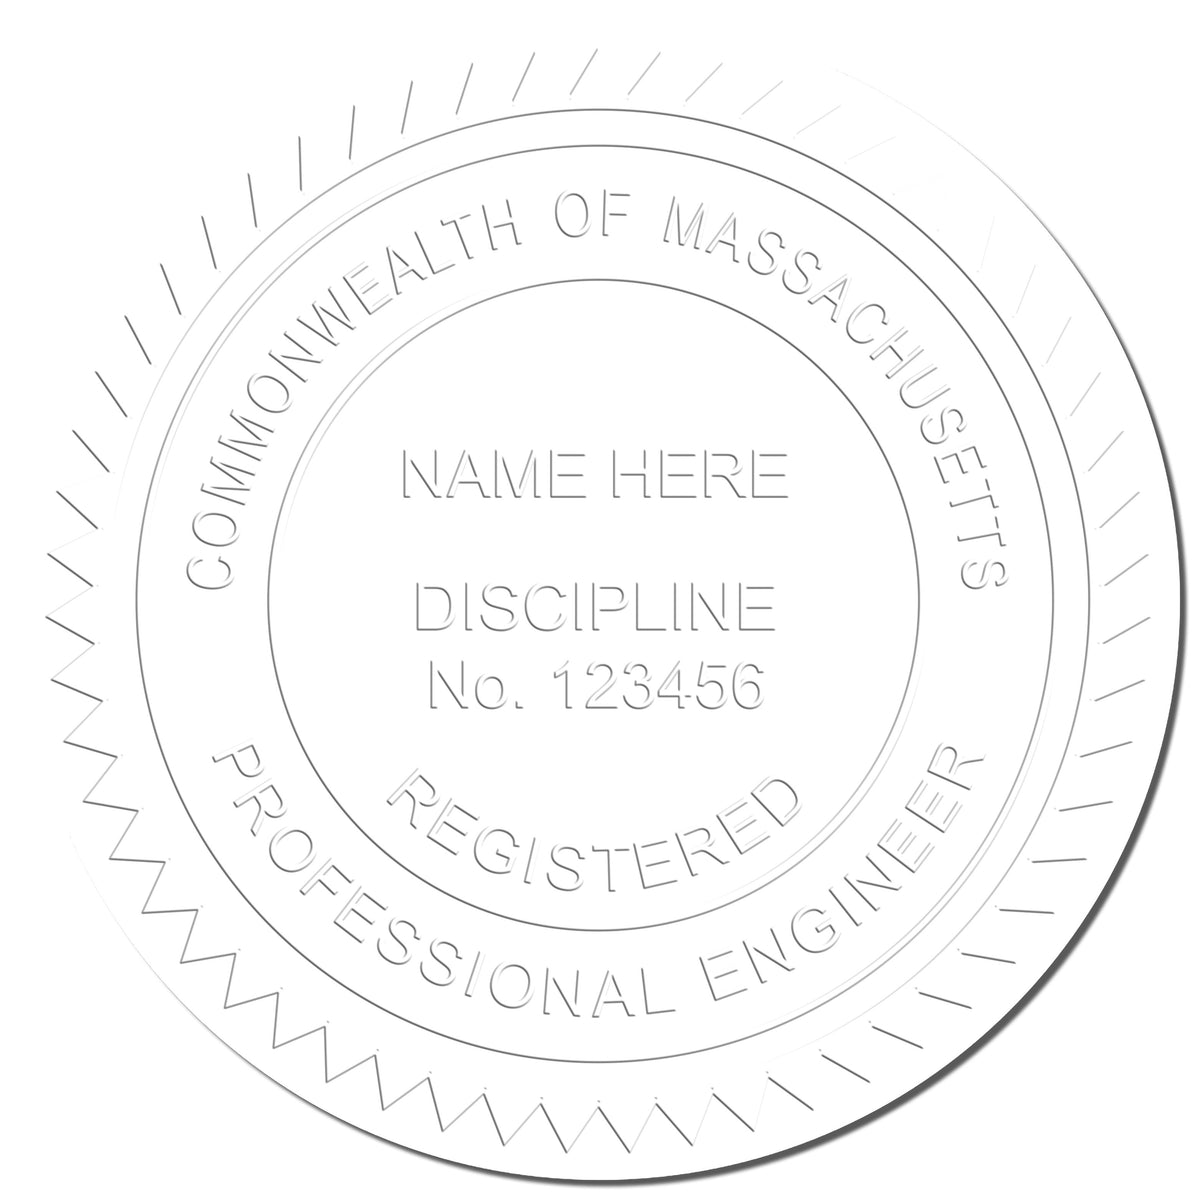 This paper is stamped with a sample imprint of the Heavy Duty Cast Iron Massachusetts Engineer Seal Embosser, signifying its quality and reliability.